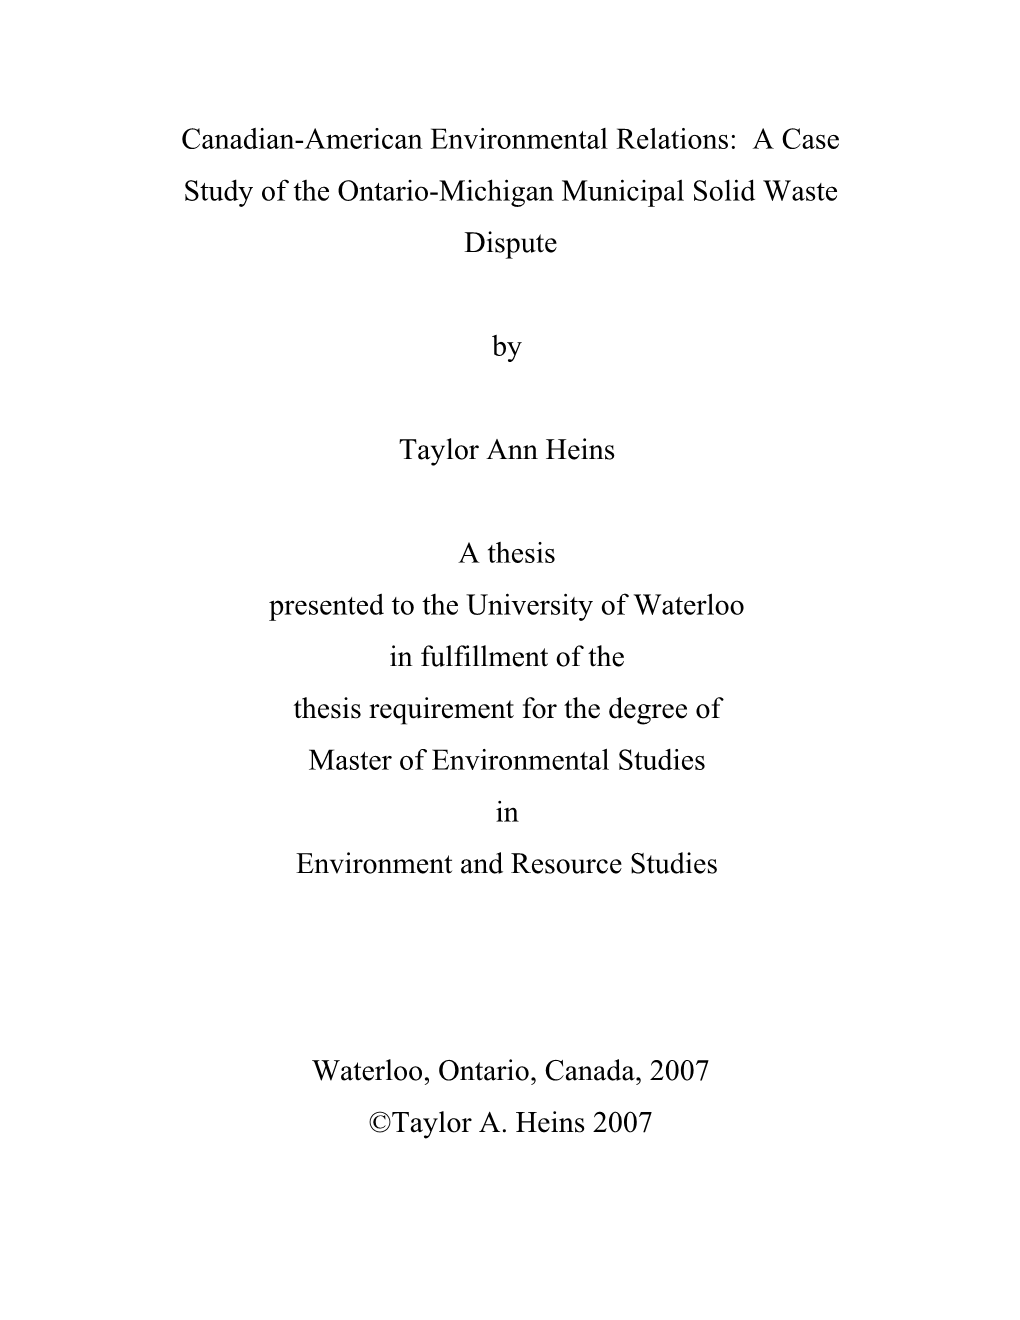 Canadian-American Environmental Relations: a Case Study of the Ontario-Michigan Municipal Solid Waste Dispute